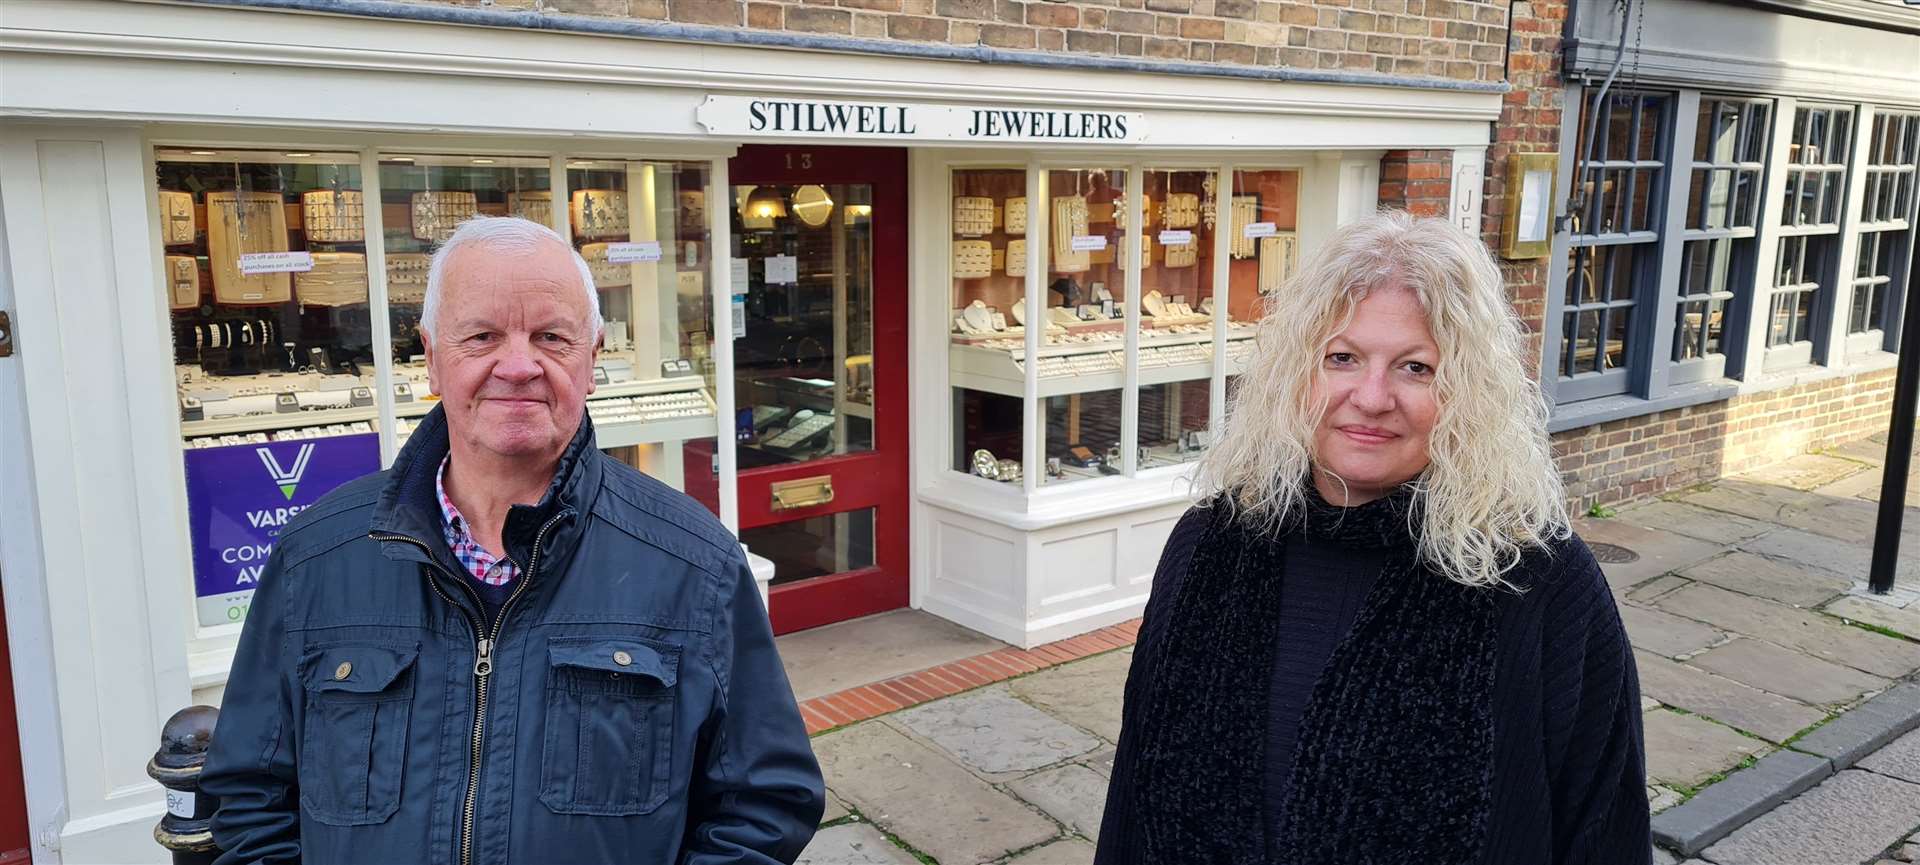 Michael and Charlotte Stilwell outside the family jewellery business